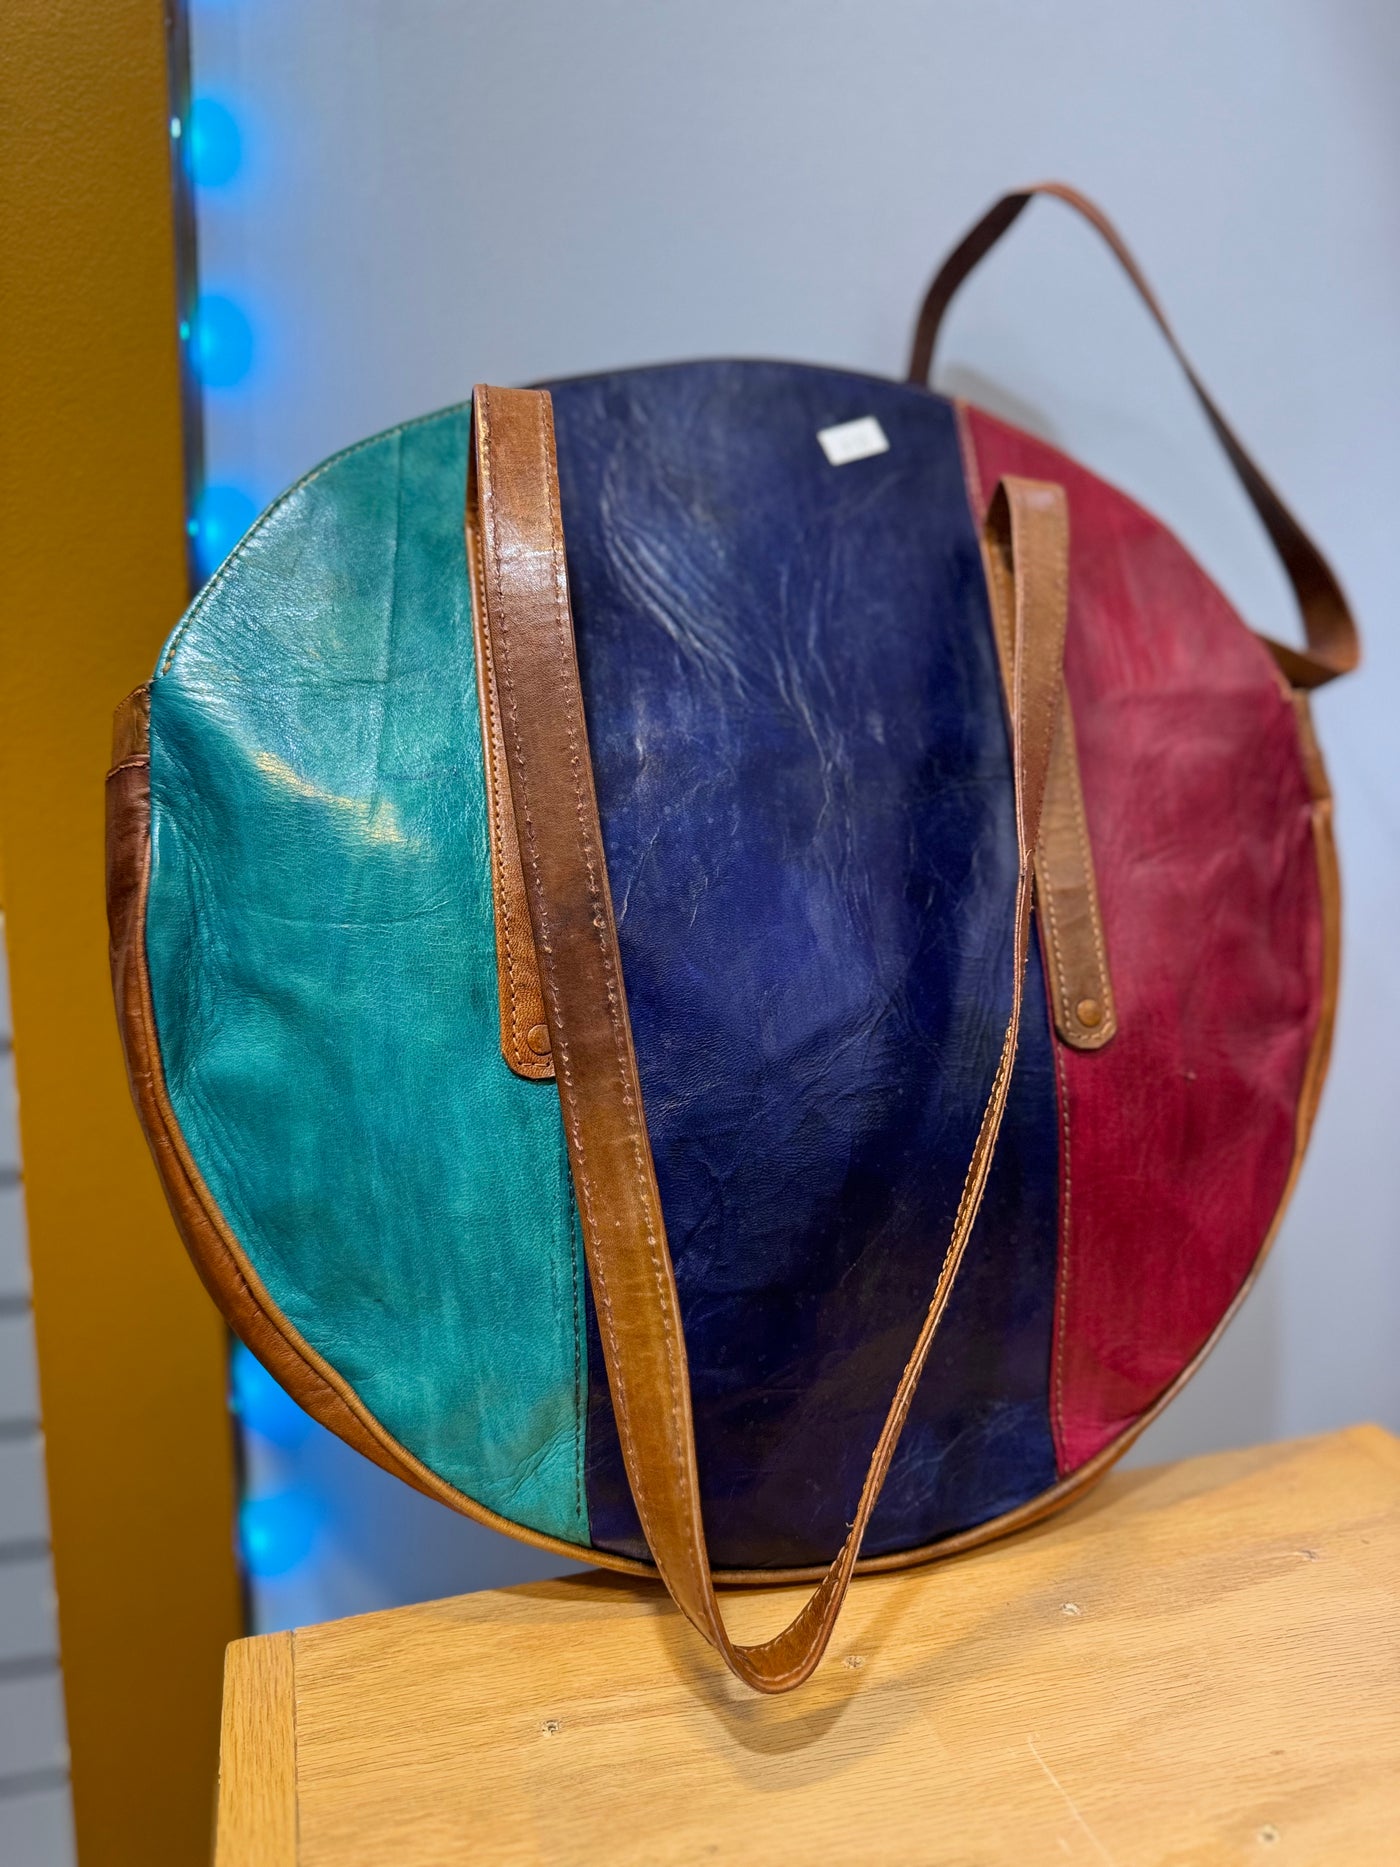 Mali Heritage Collection: Exquisite Handmade Leather Satchel